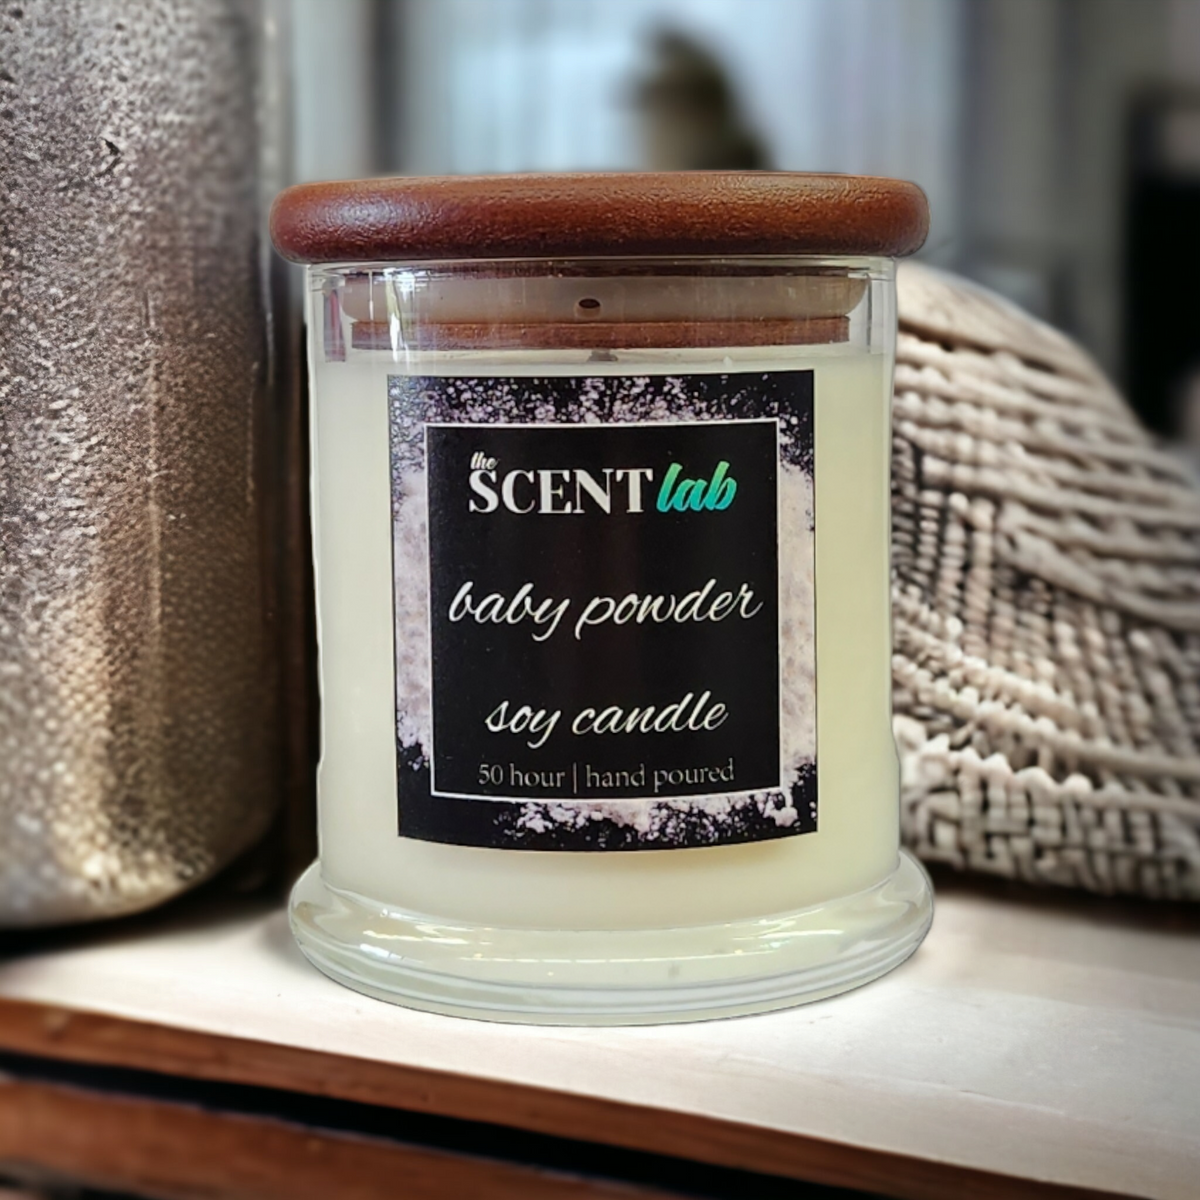 Baby Reveal Candle - baby powder scent